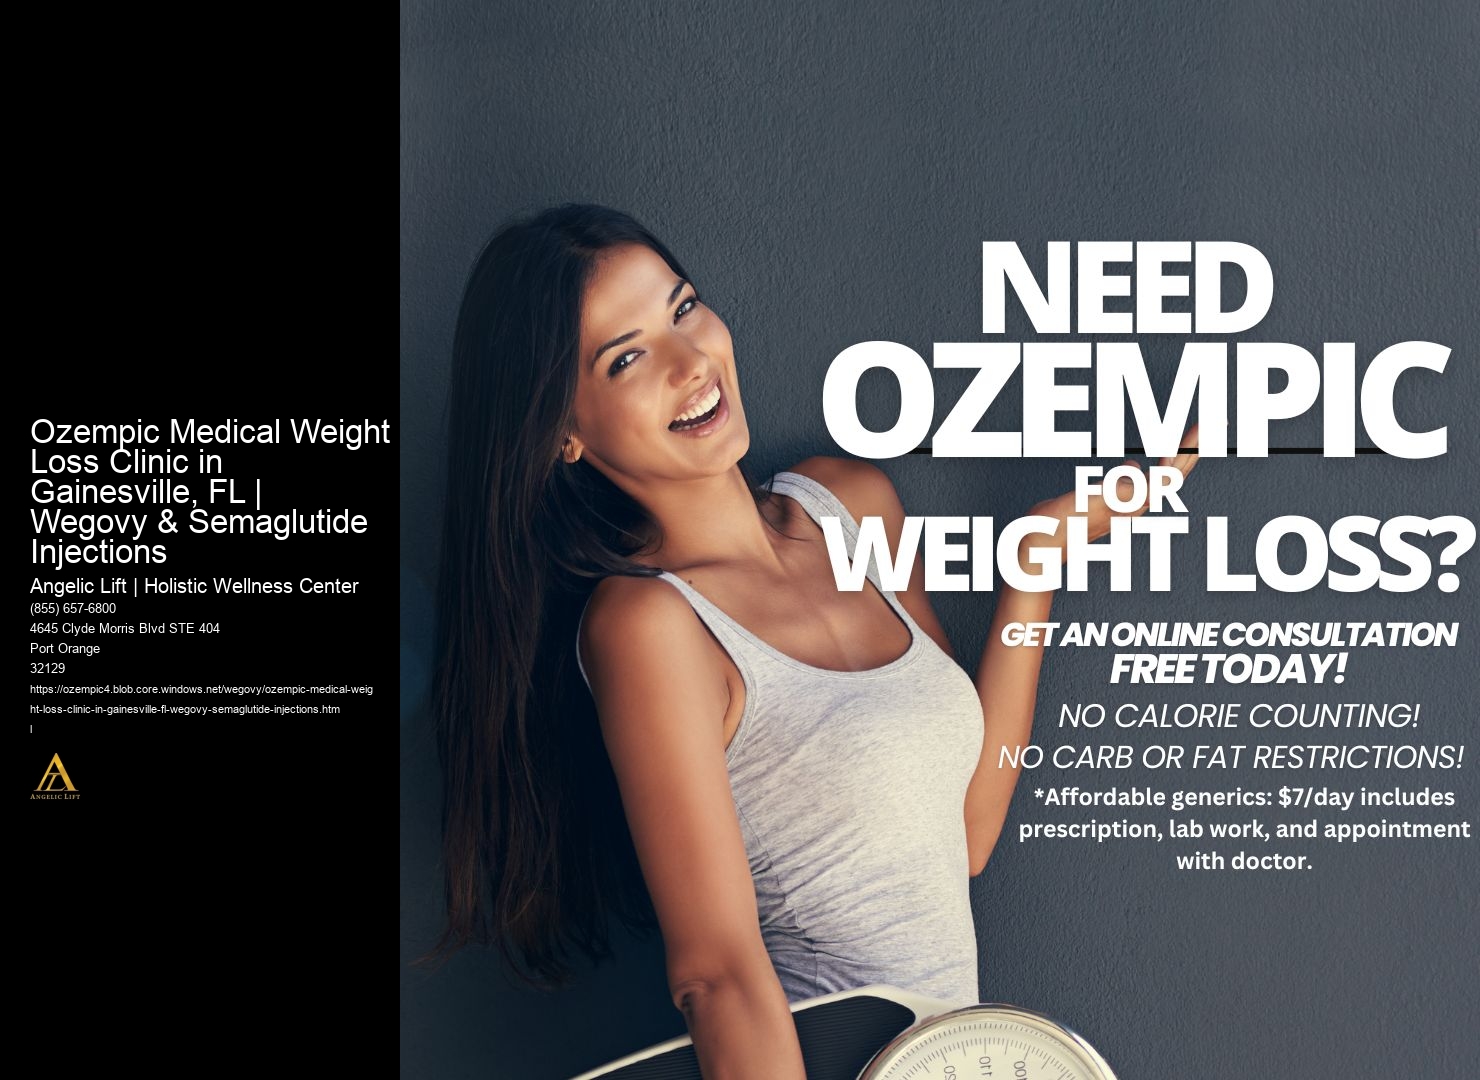 Ozempic Medical Weight Loss Clinic in Gainesville, FL | Wegovy & Semaglutide Injections